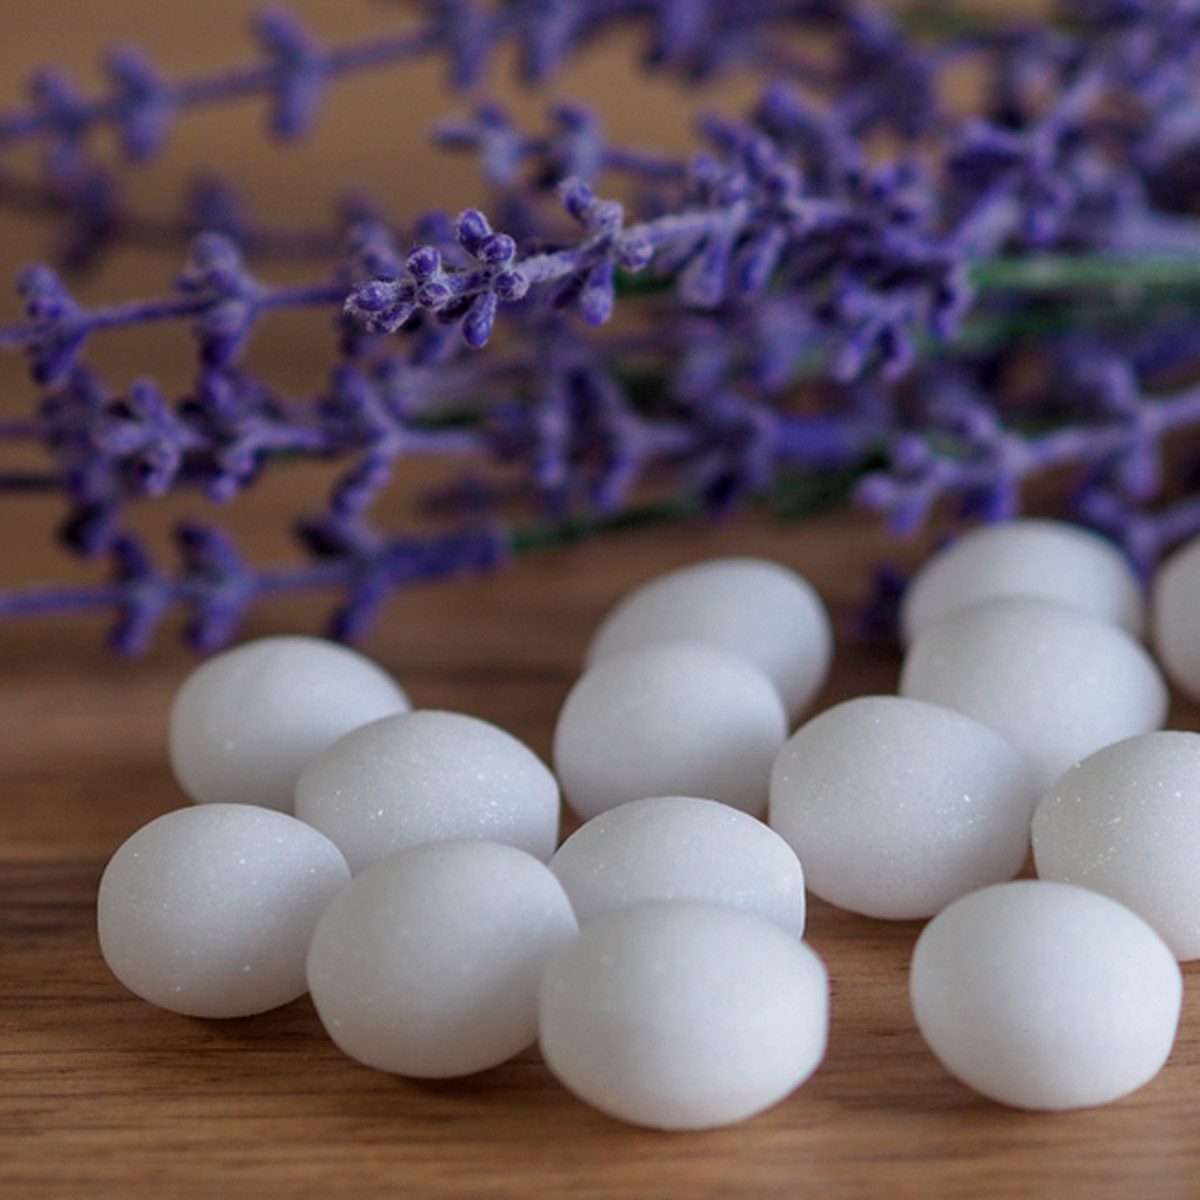 Mothballs are a pesticide and should be used with care